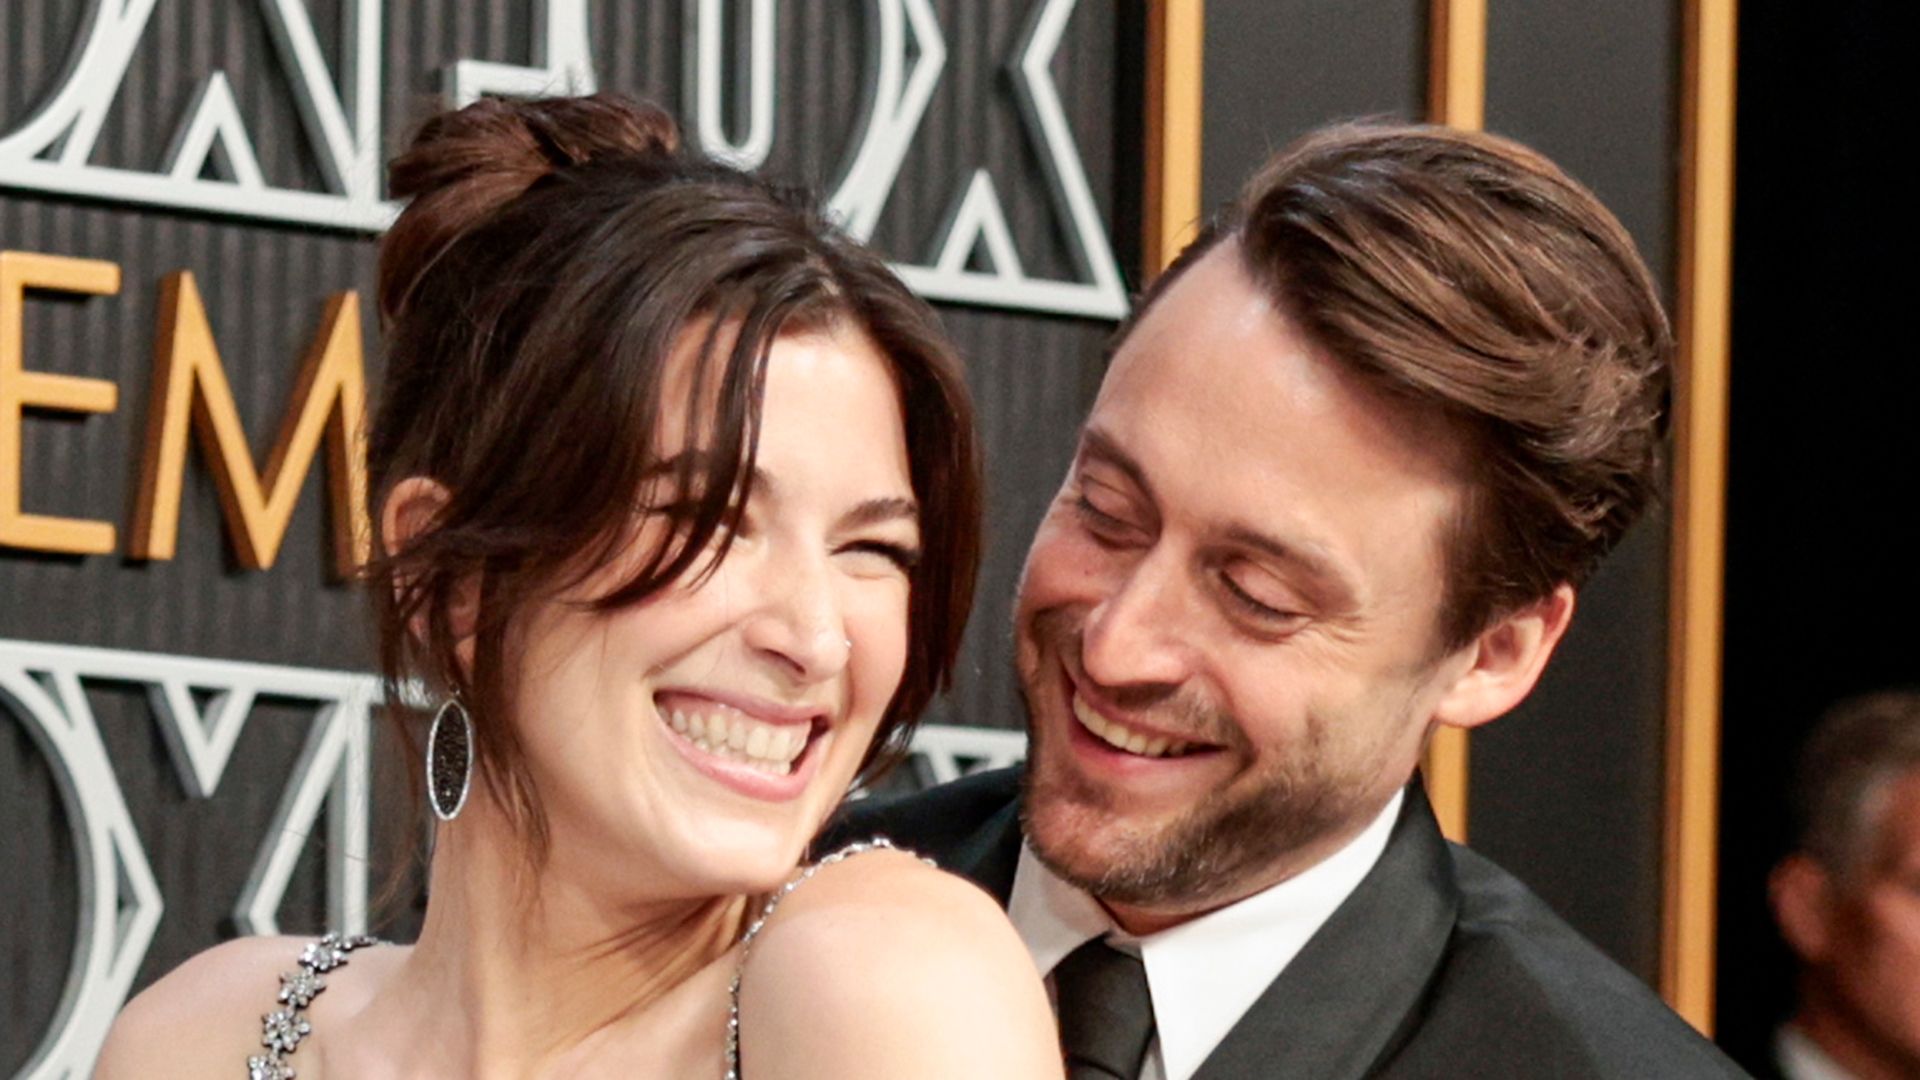 Kieran Culkin and wife Jazz cuddle up on the Emmys red carpet